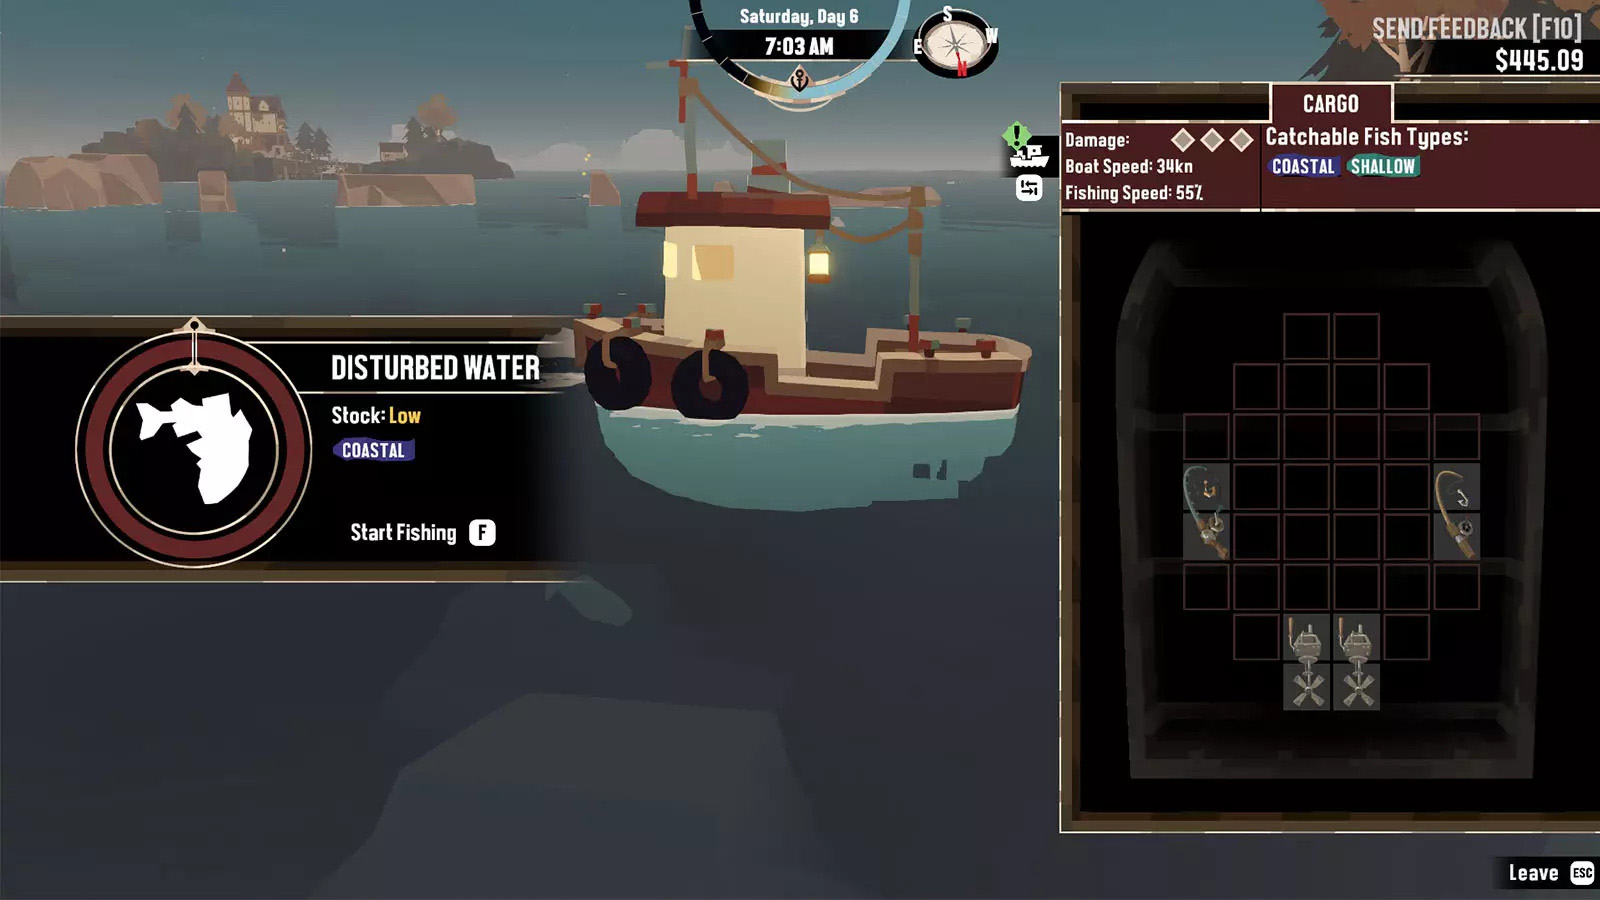 A small boat floating in the water with video game stats visible.